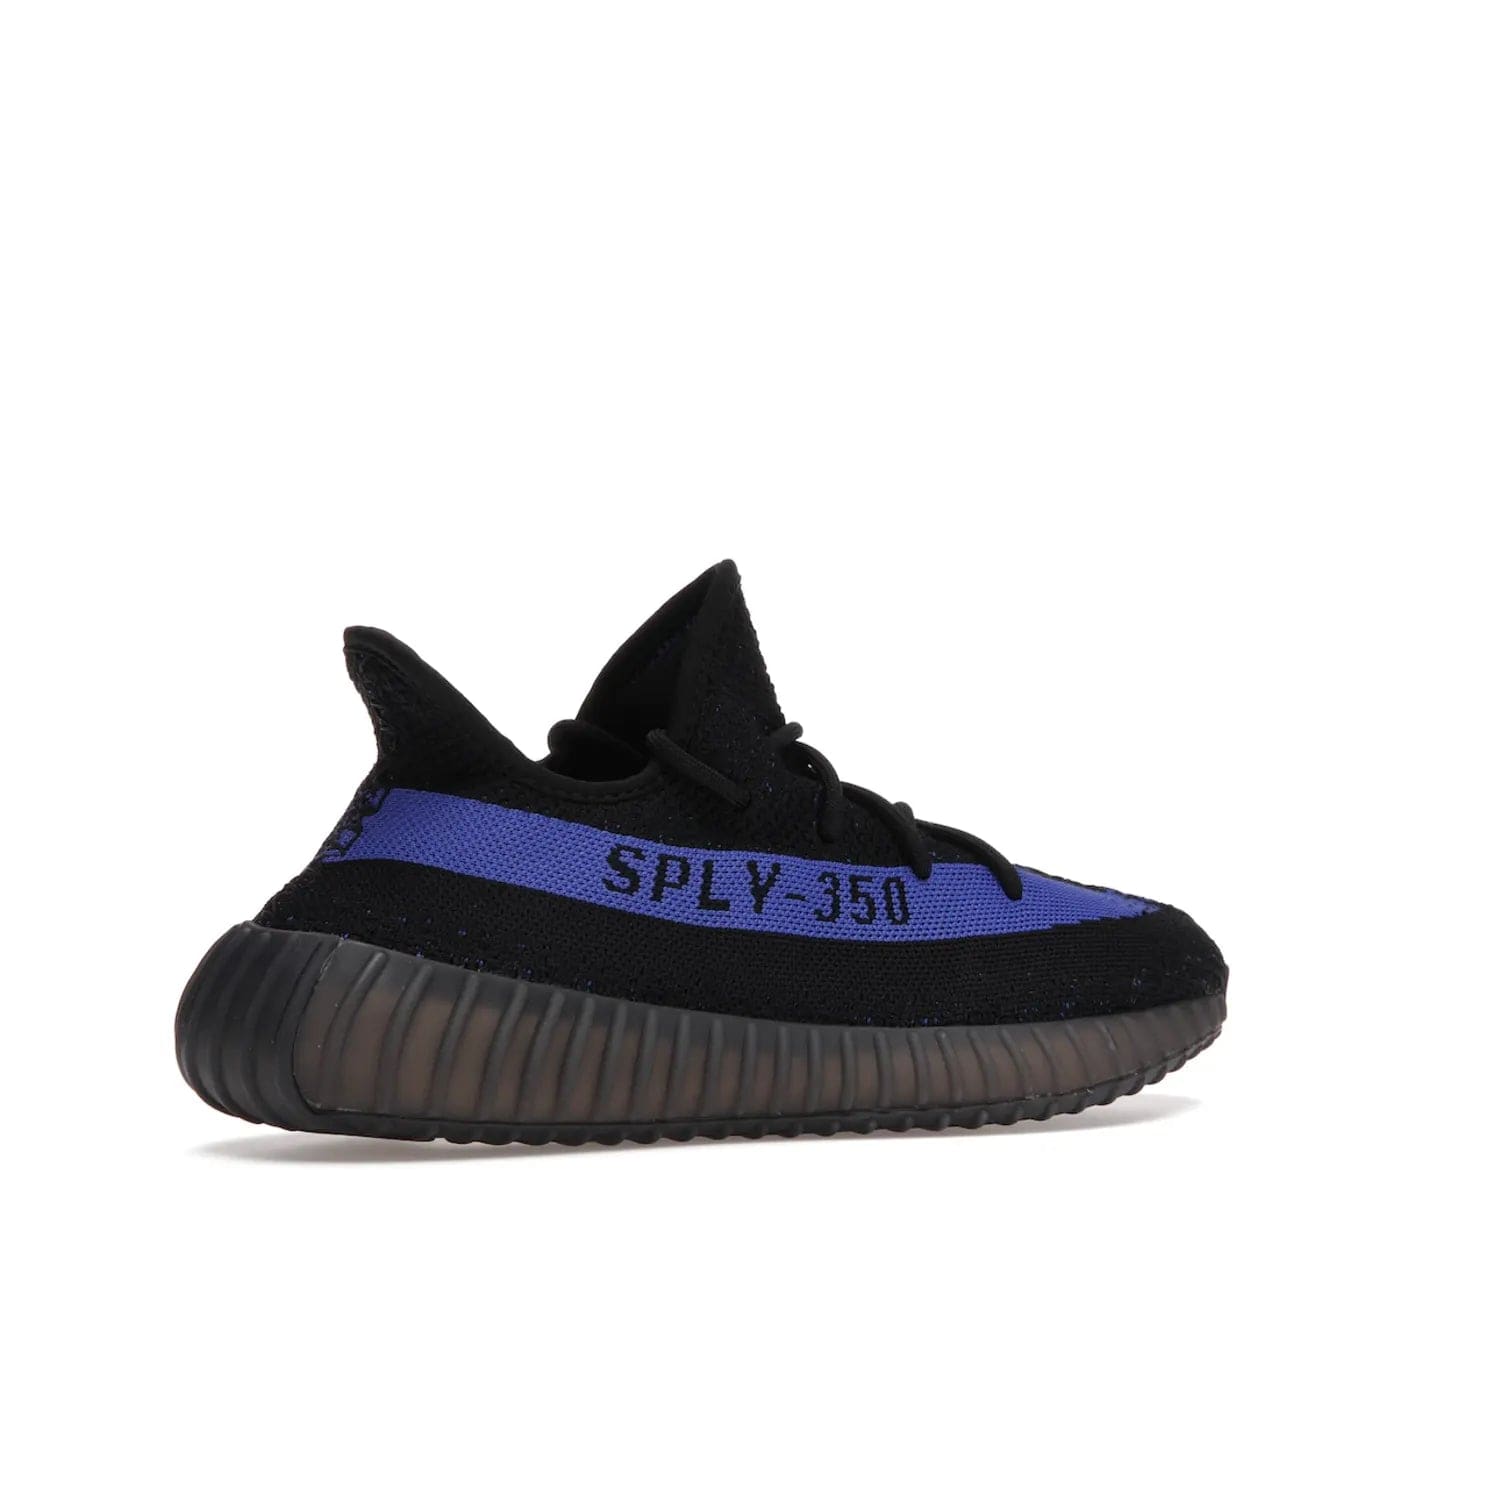 adidas Yeezy Boost 350 V2 Dazzling Blue - Image 34 - Only at www.BallersClubKickz.com - Shop the Adidas Yeezy 350 V2 Dazzling Blue, featuring a solid black Primeknit upper, Dazzling Blue side stripe, “SPLY-350” text, and a muted Boost sole. Releasing Feb 2022, this style is perfect for any shoe fan.